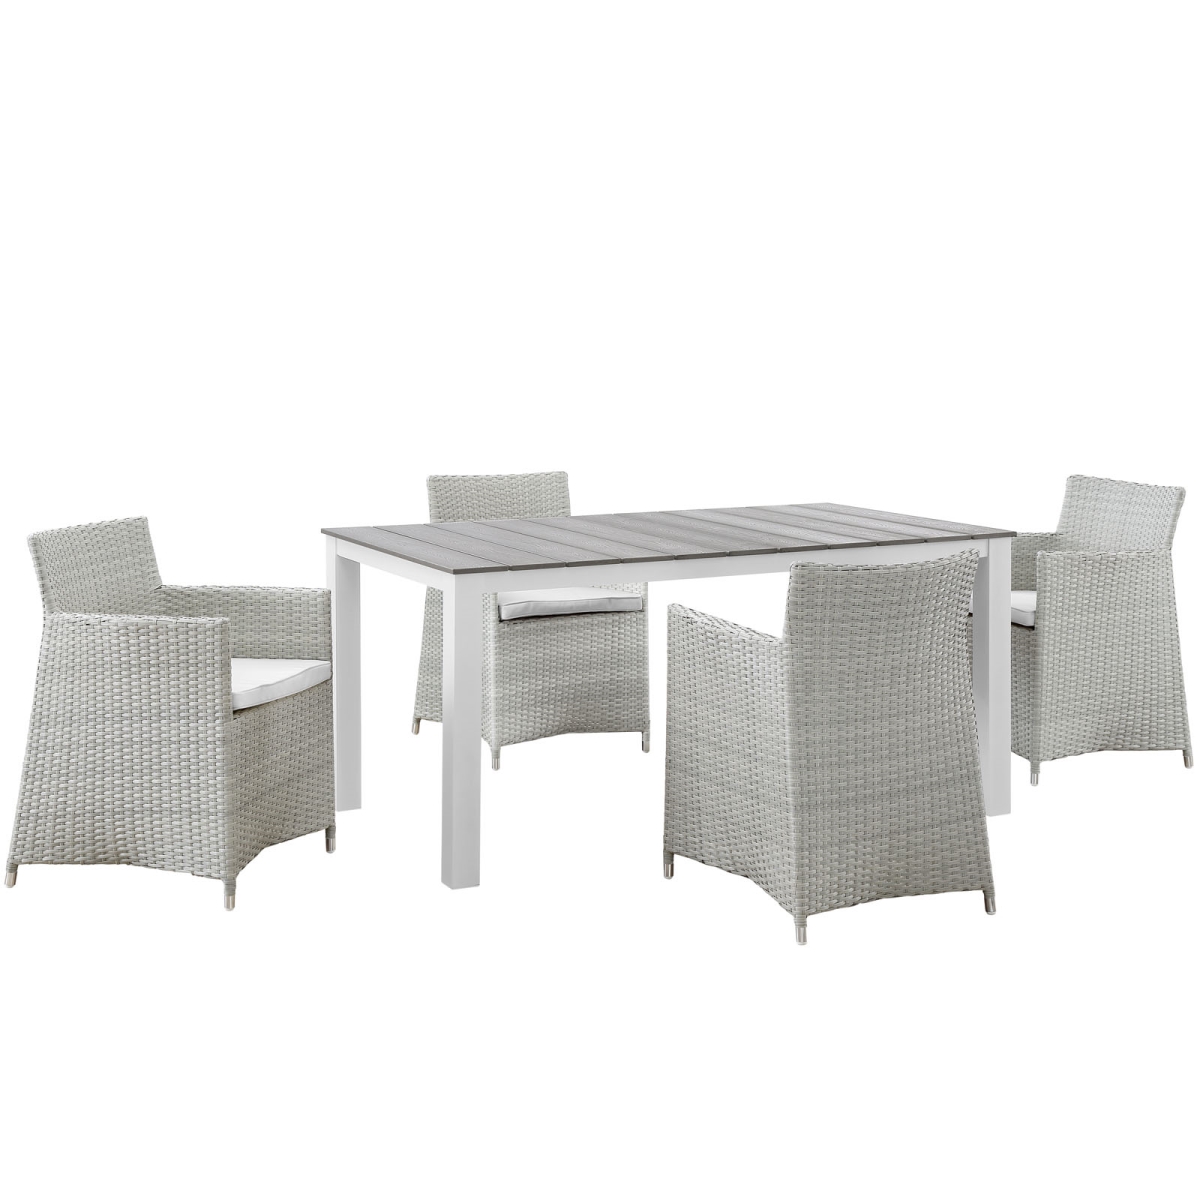 Eastend Eei-1746-gry-whi-set 5 Piece Junction Outdoor Patio Dining Set, White Poly Rattan